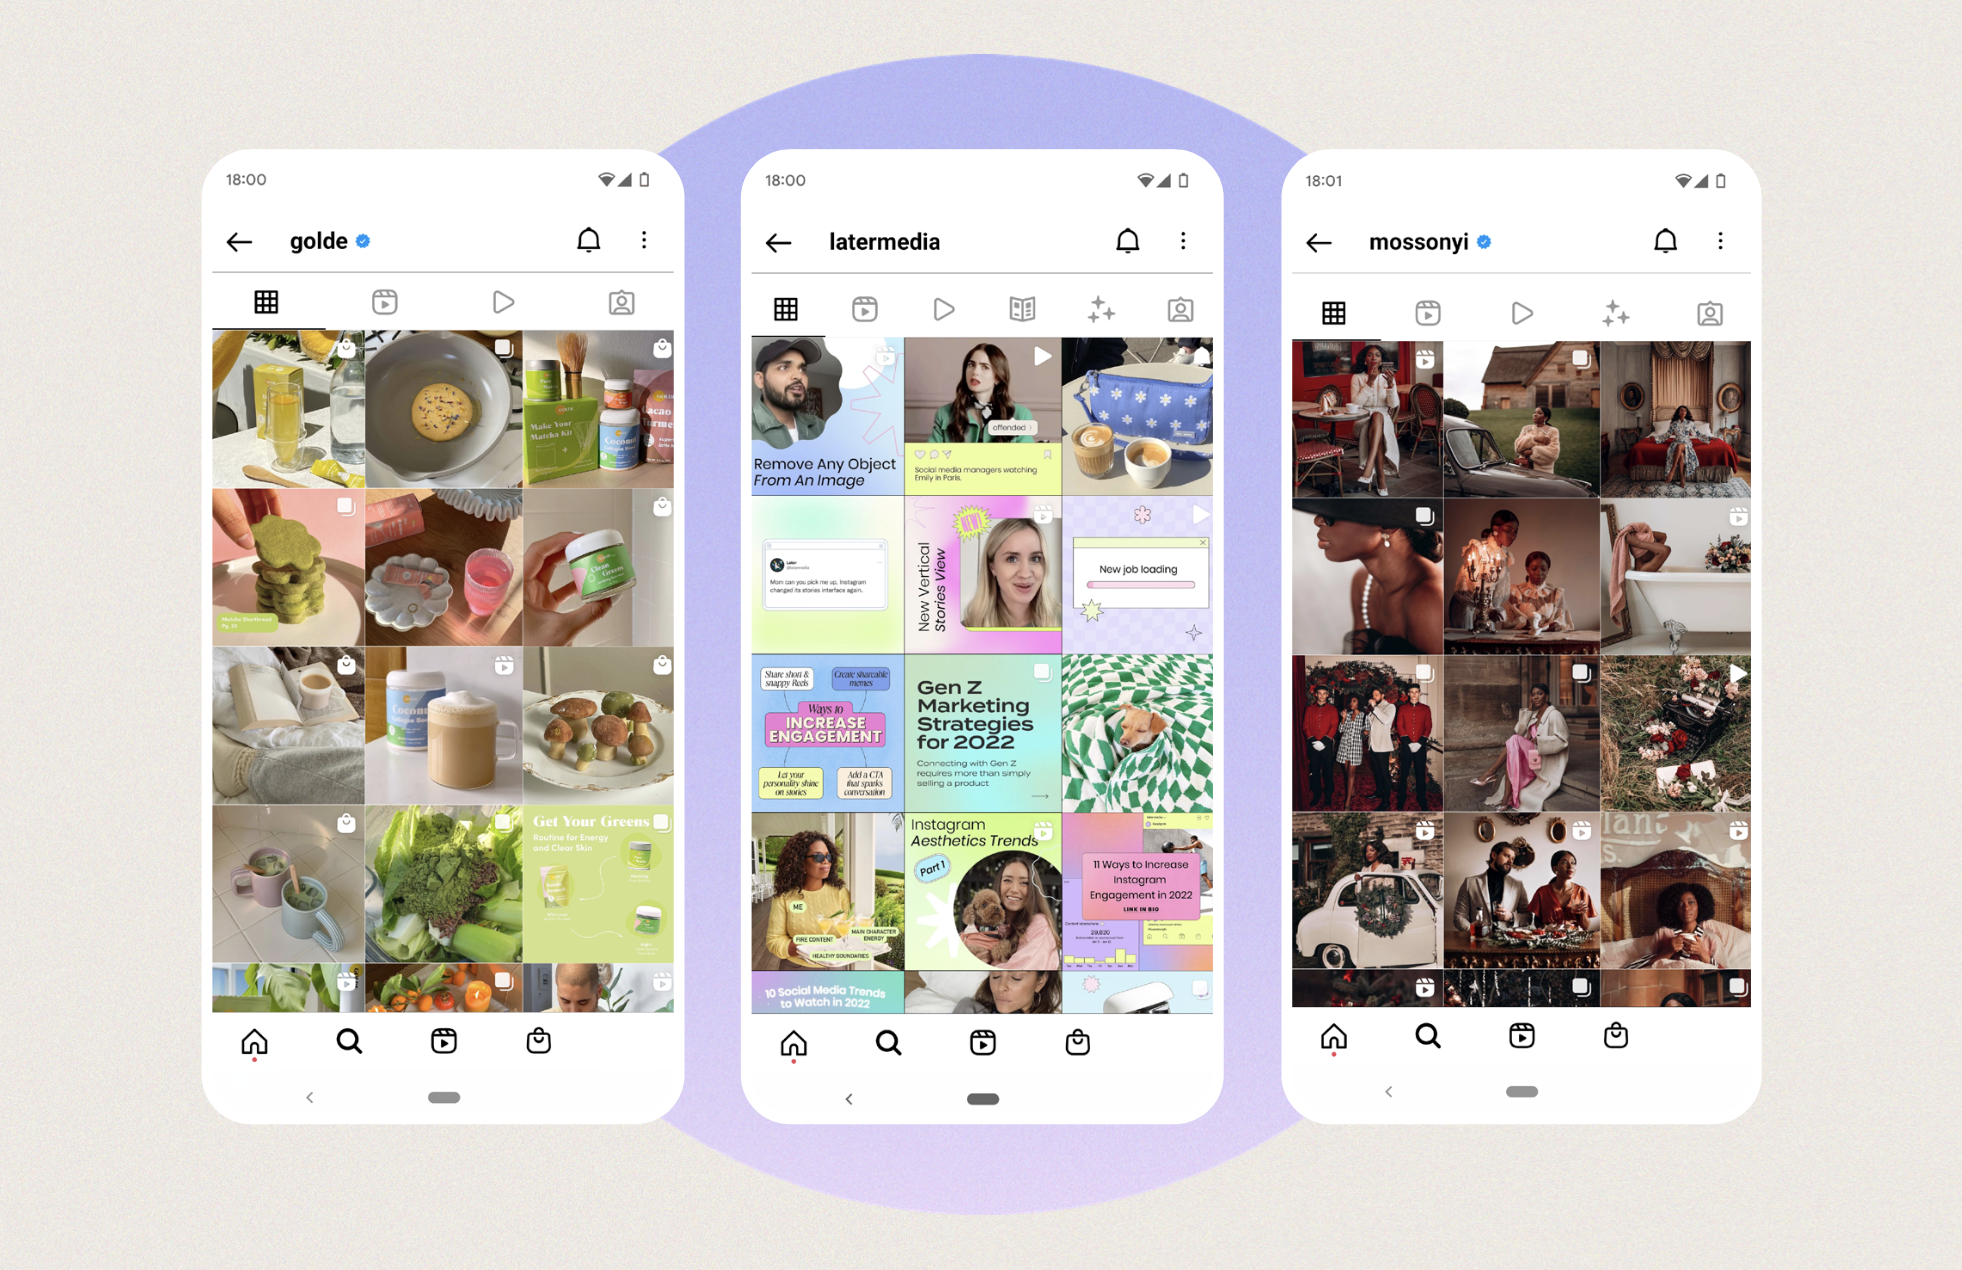 Instagram Adds Following and Favorites Chronological Feed Features - CNET